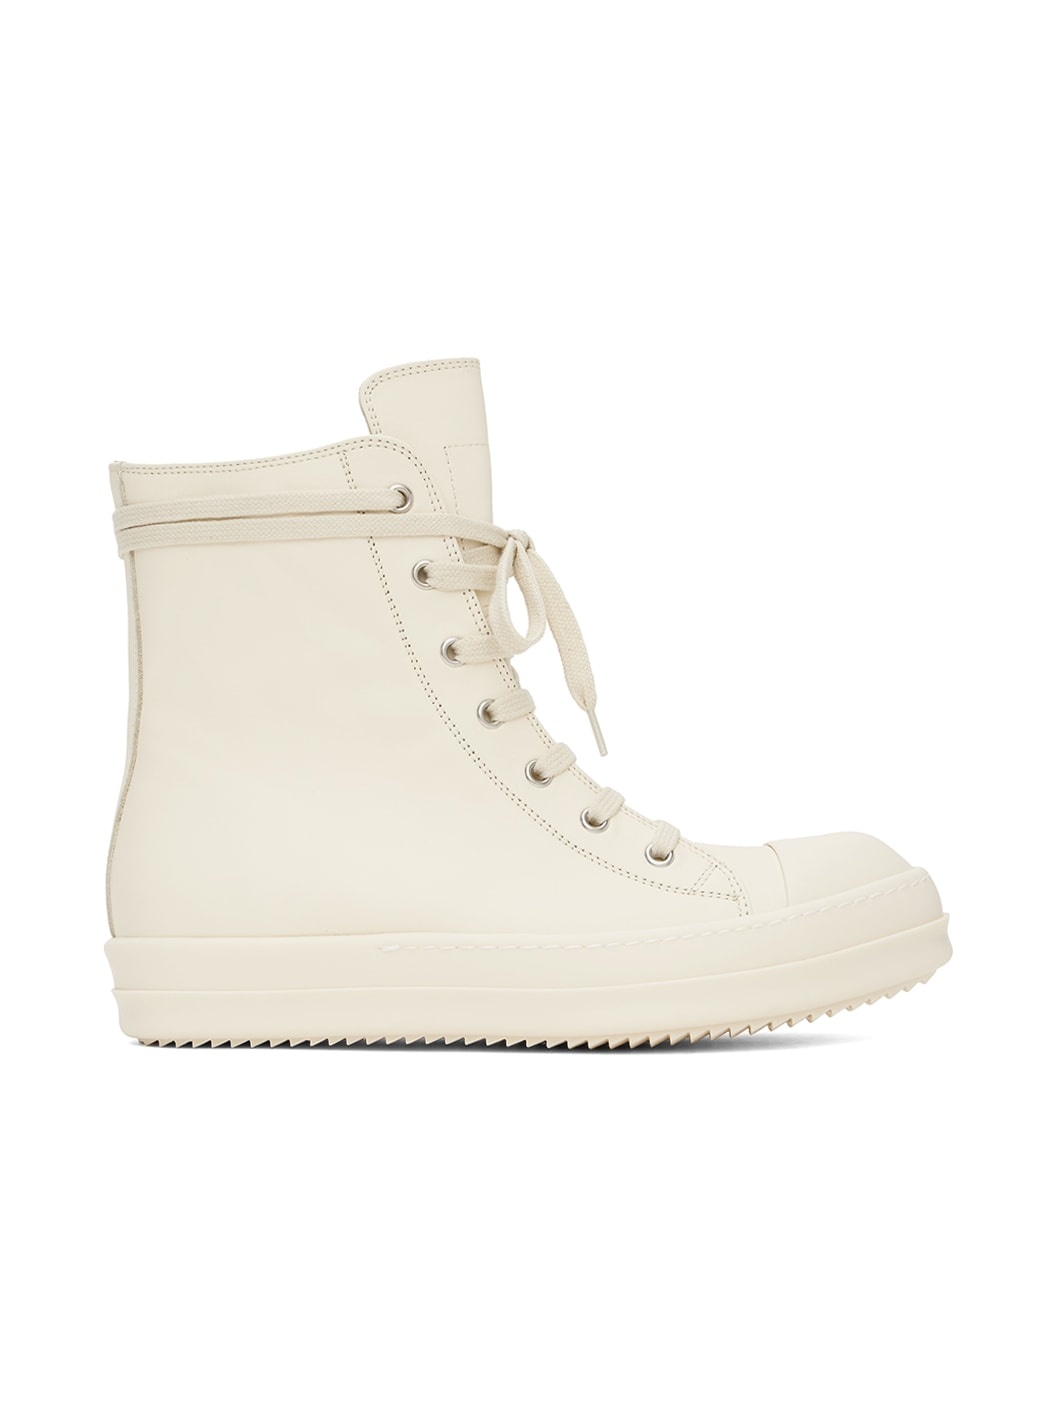 Off-White High Sneakers - 1